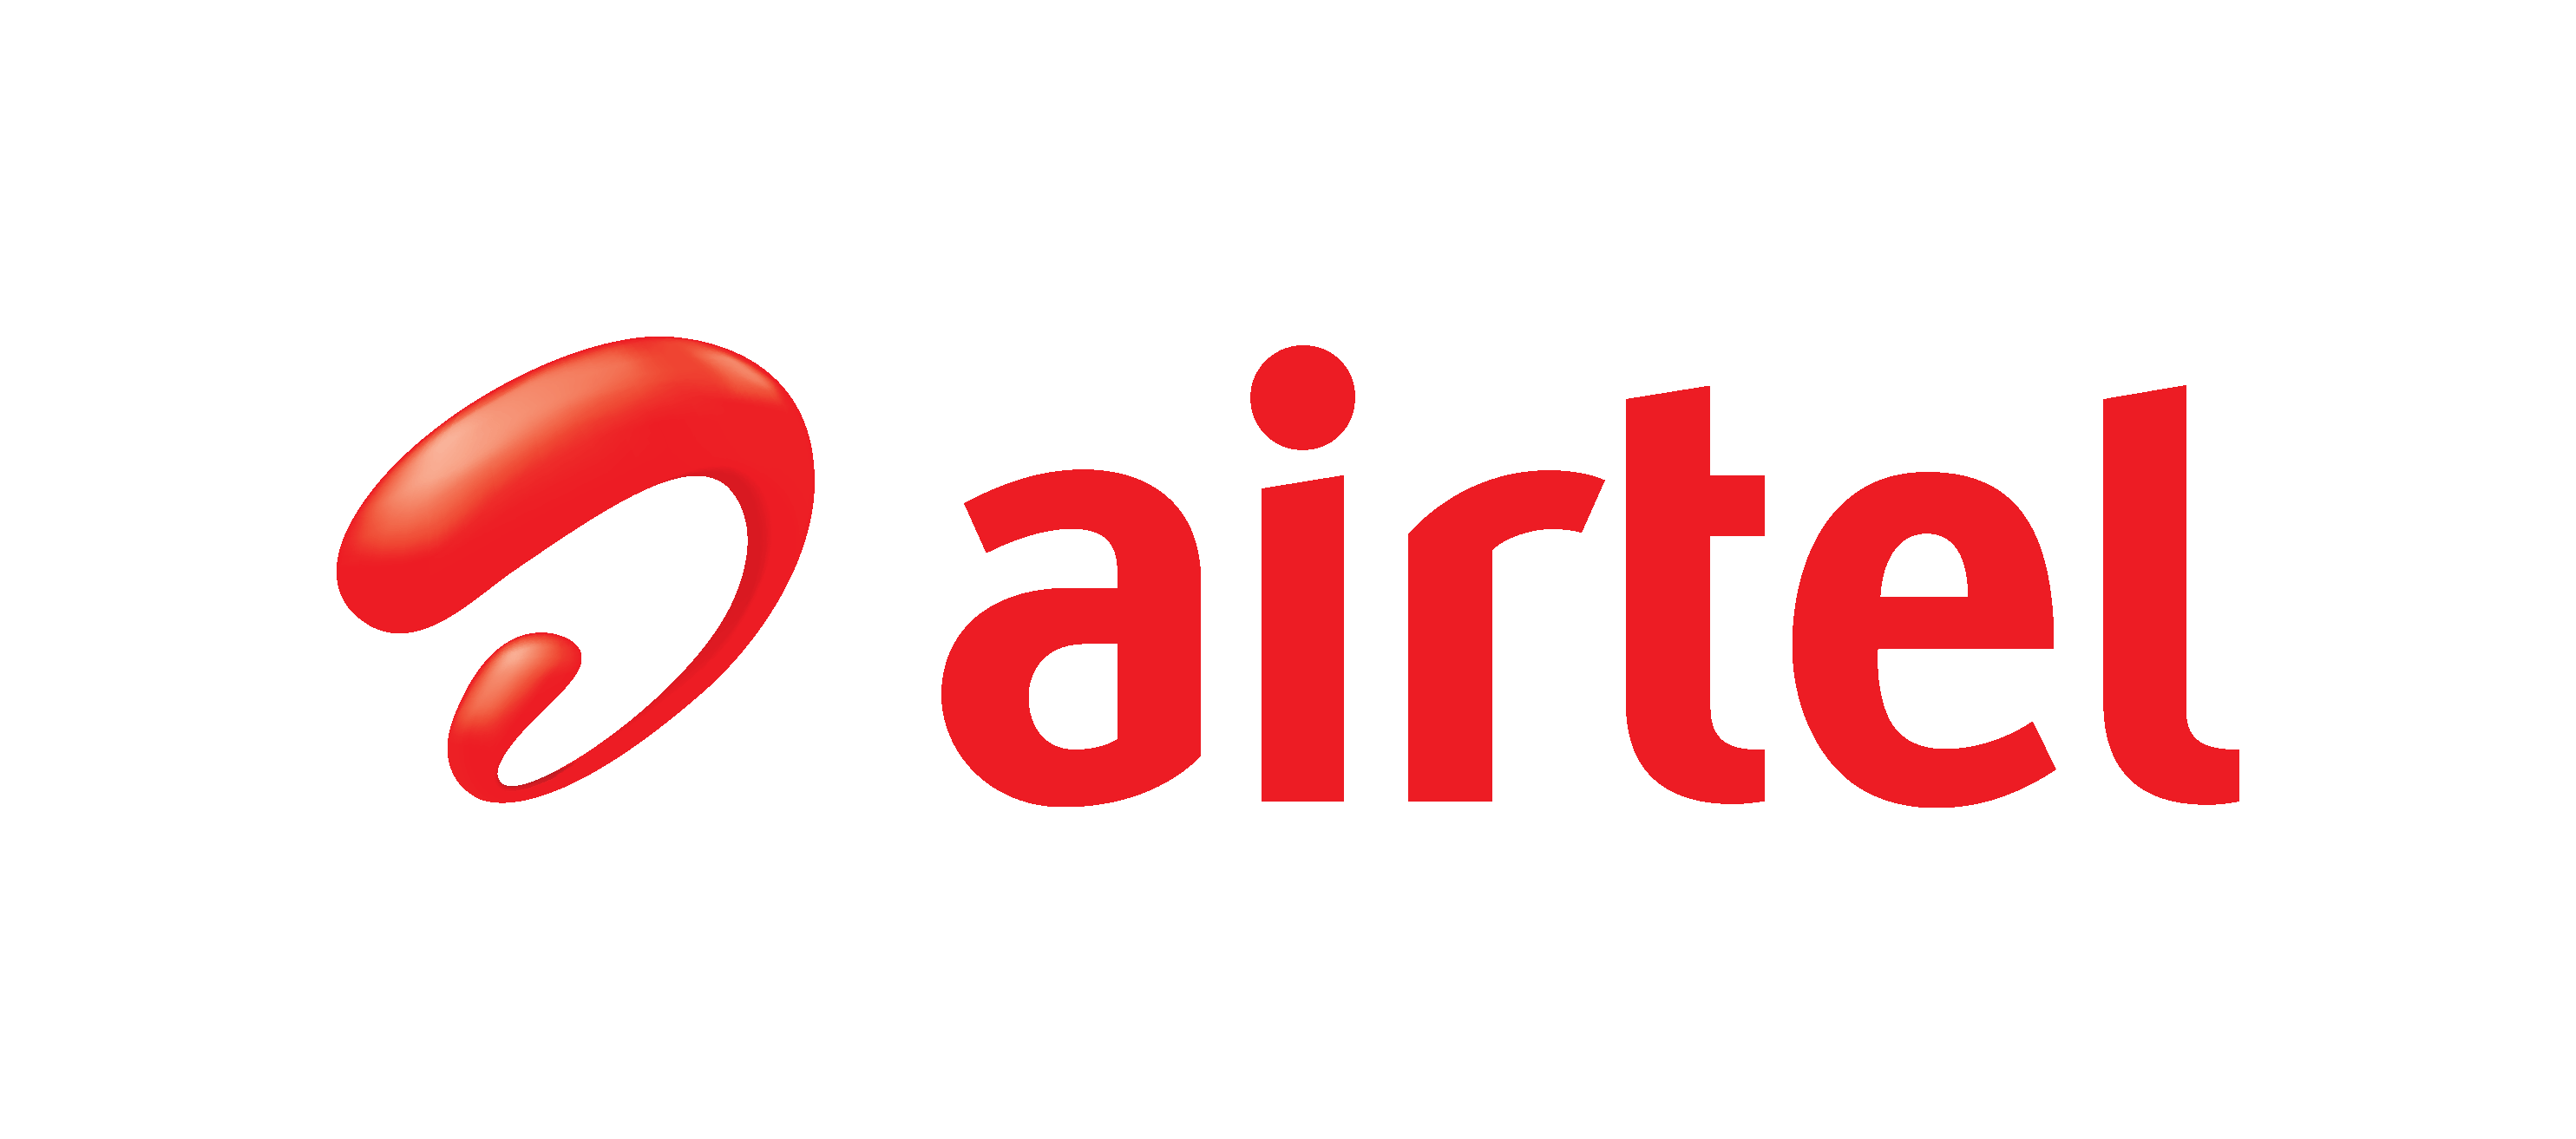 Airtel Kenya also collecting facial data in new re-registration drive